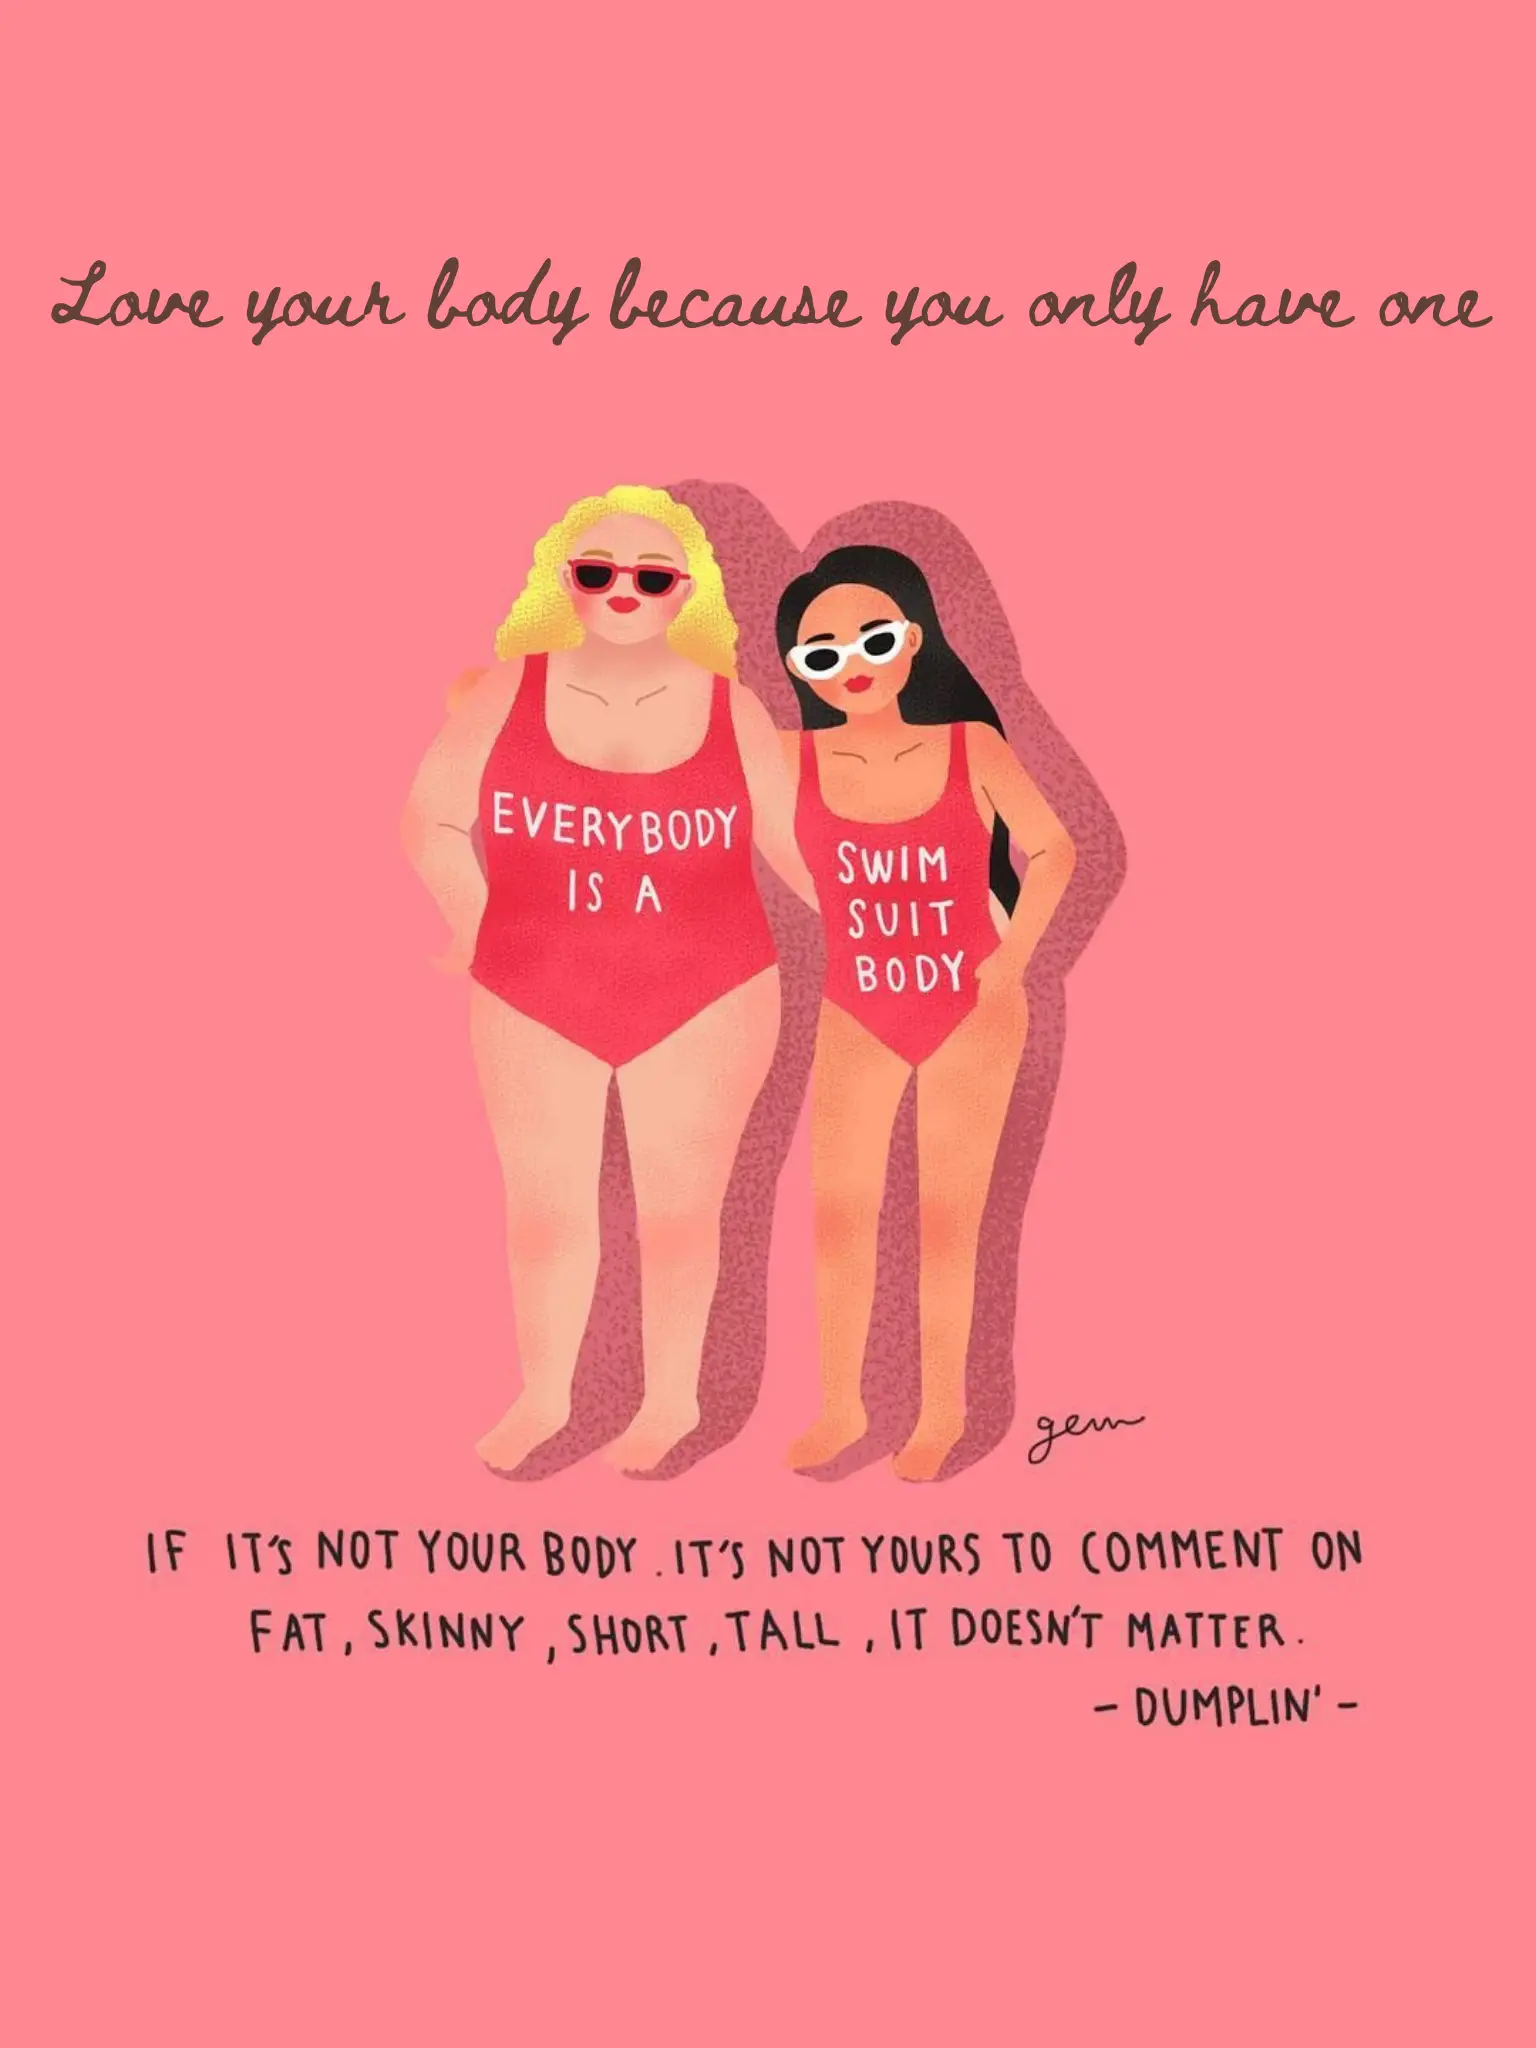 Love your body because you only have one…